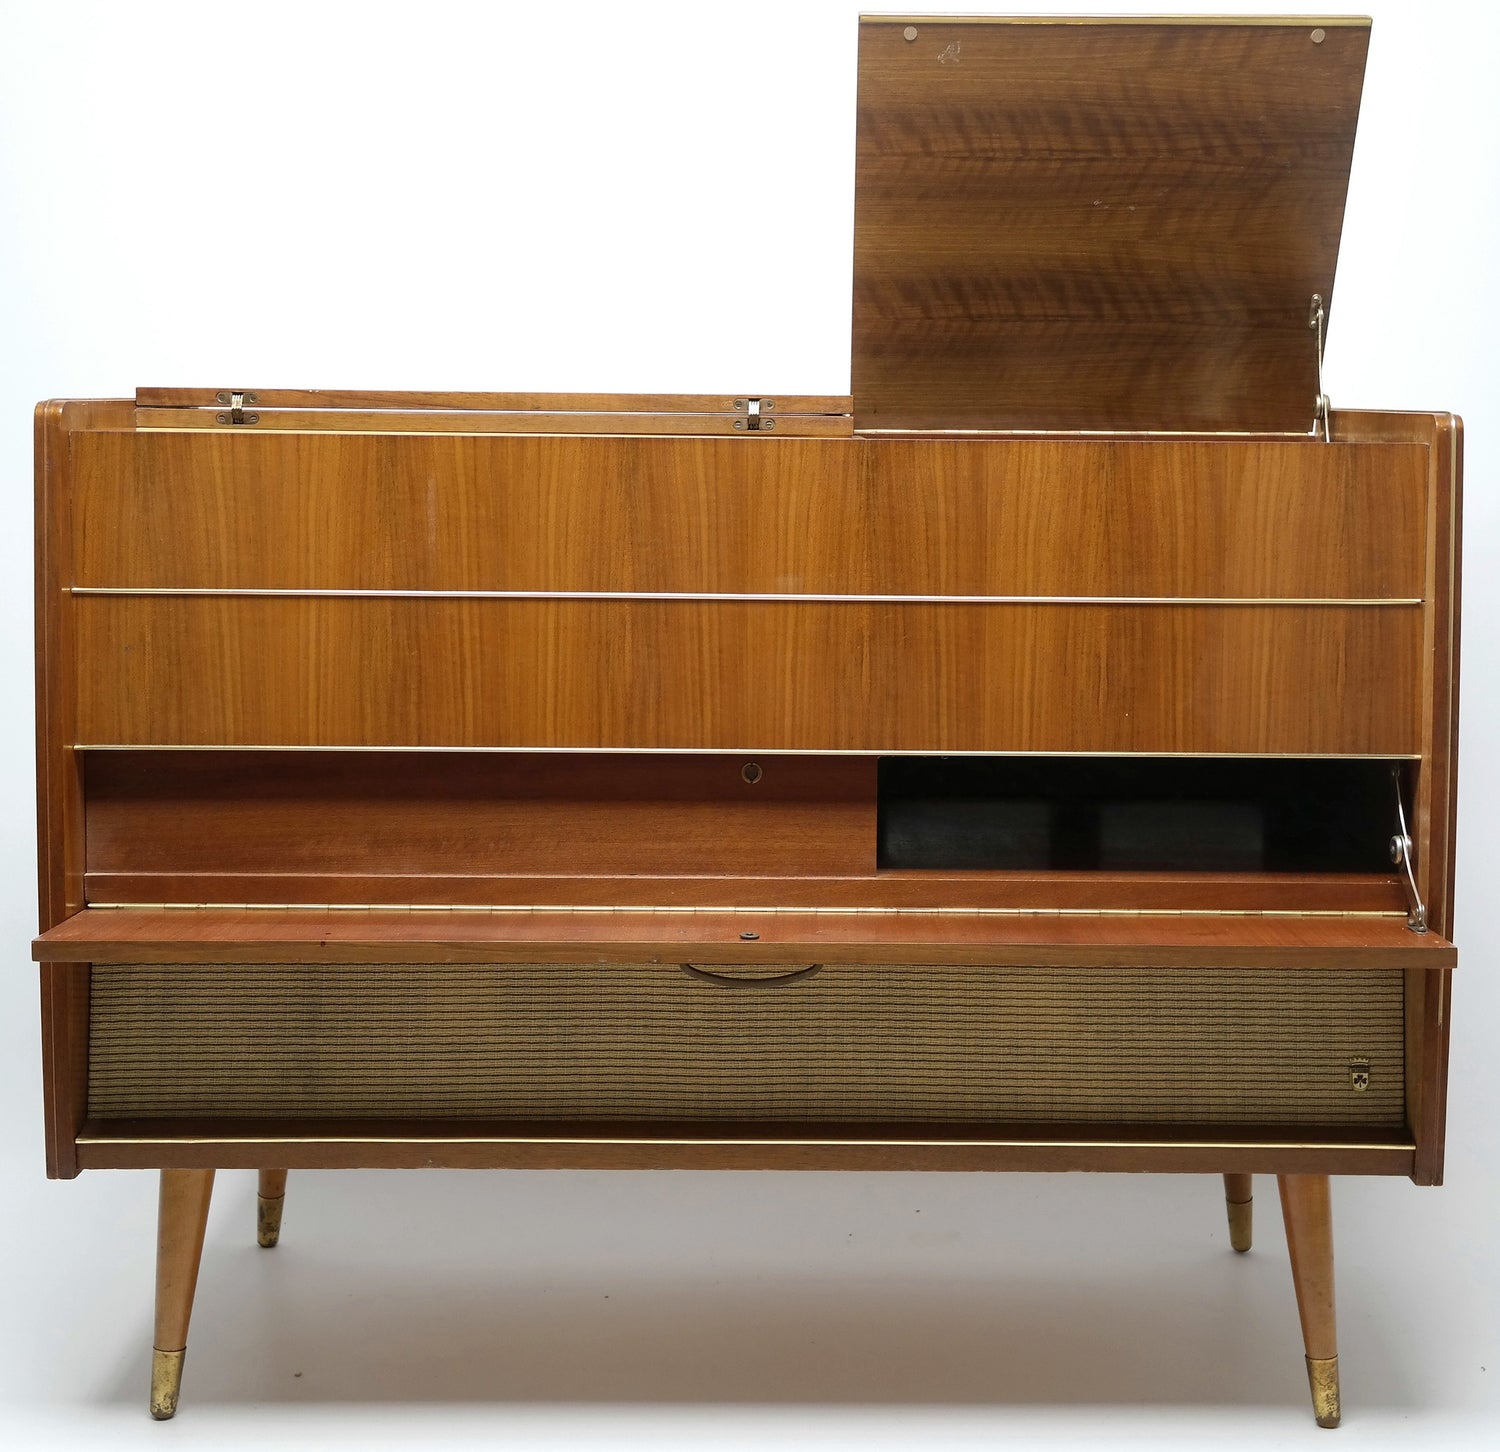 Mid Century Grundig Majestic Stereo Console Record Player - Bluetooth - AM/FM Tuner - Shortwave The Vintedge Co.